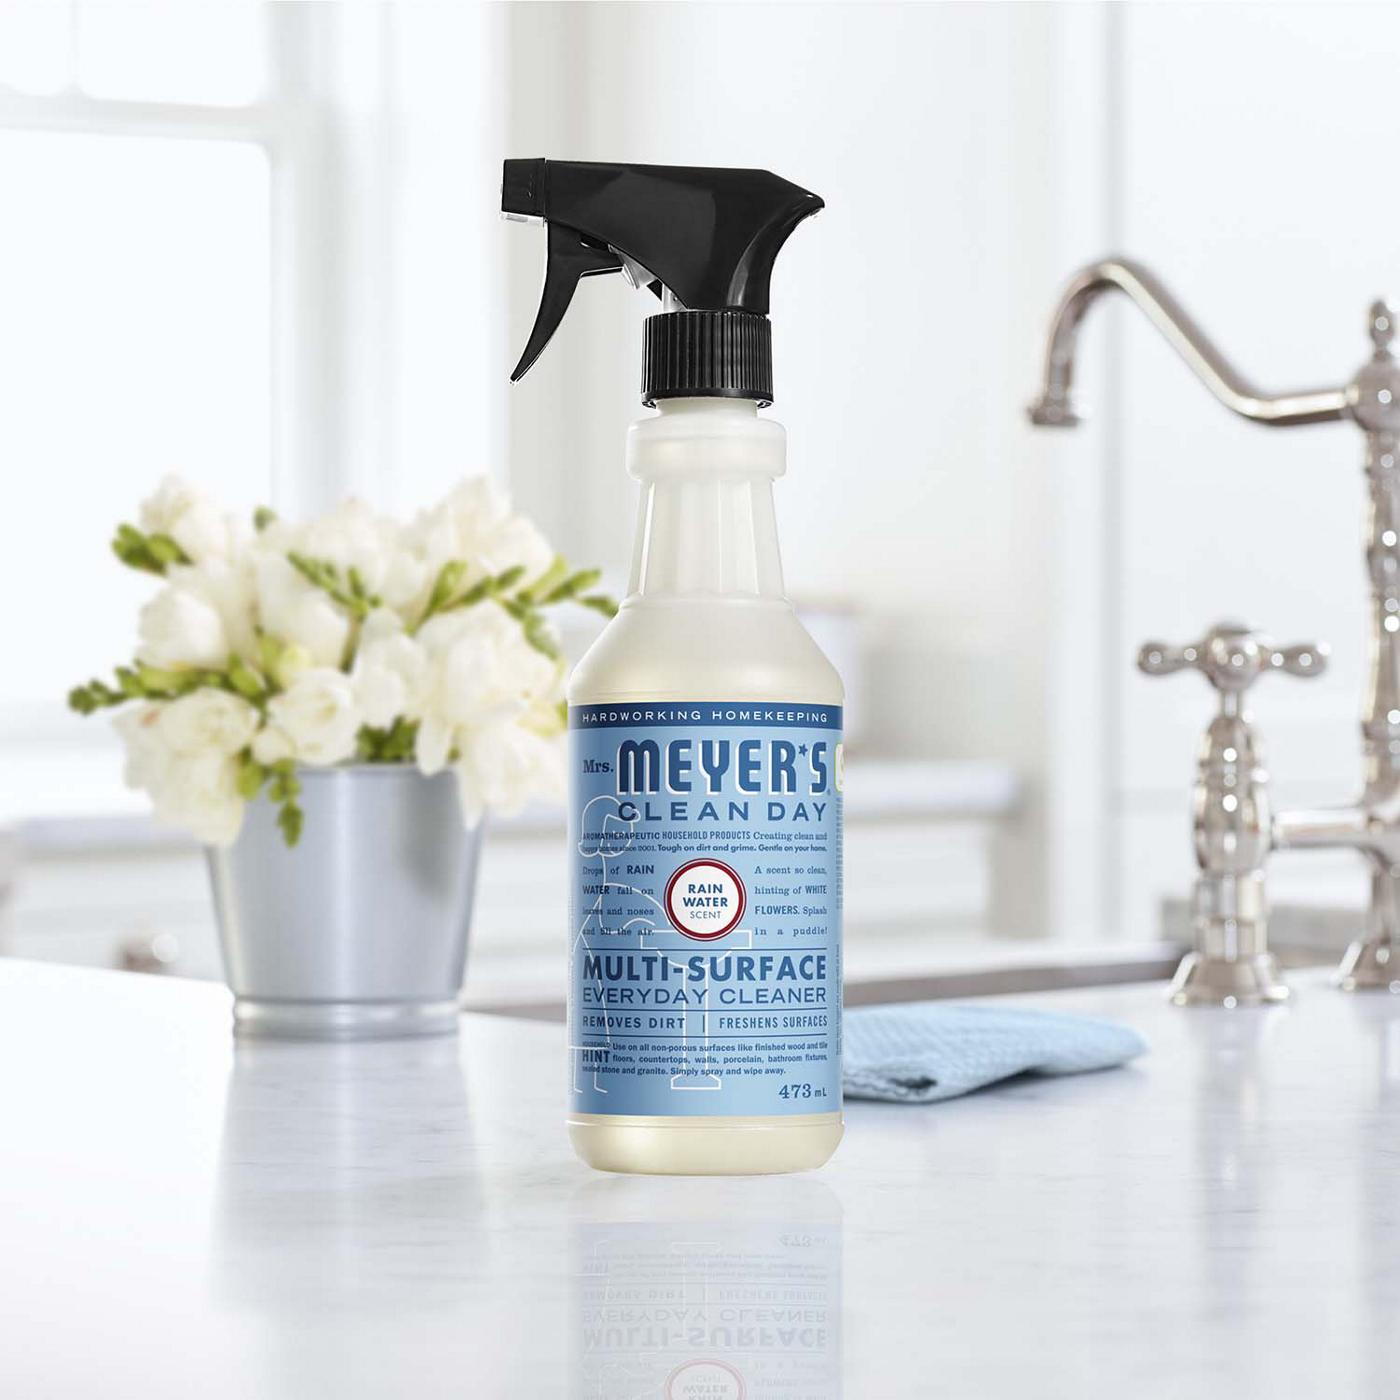 Mrs. Meyer's Clean Day Rainwater Scent Multi-Surface Everyday Cleaner Spray; image 2 of 6